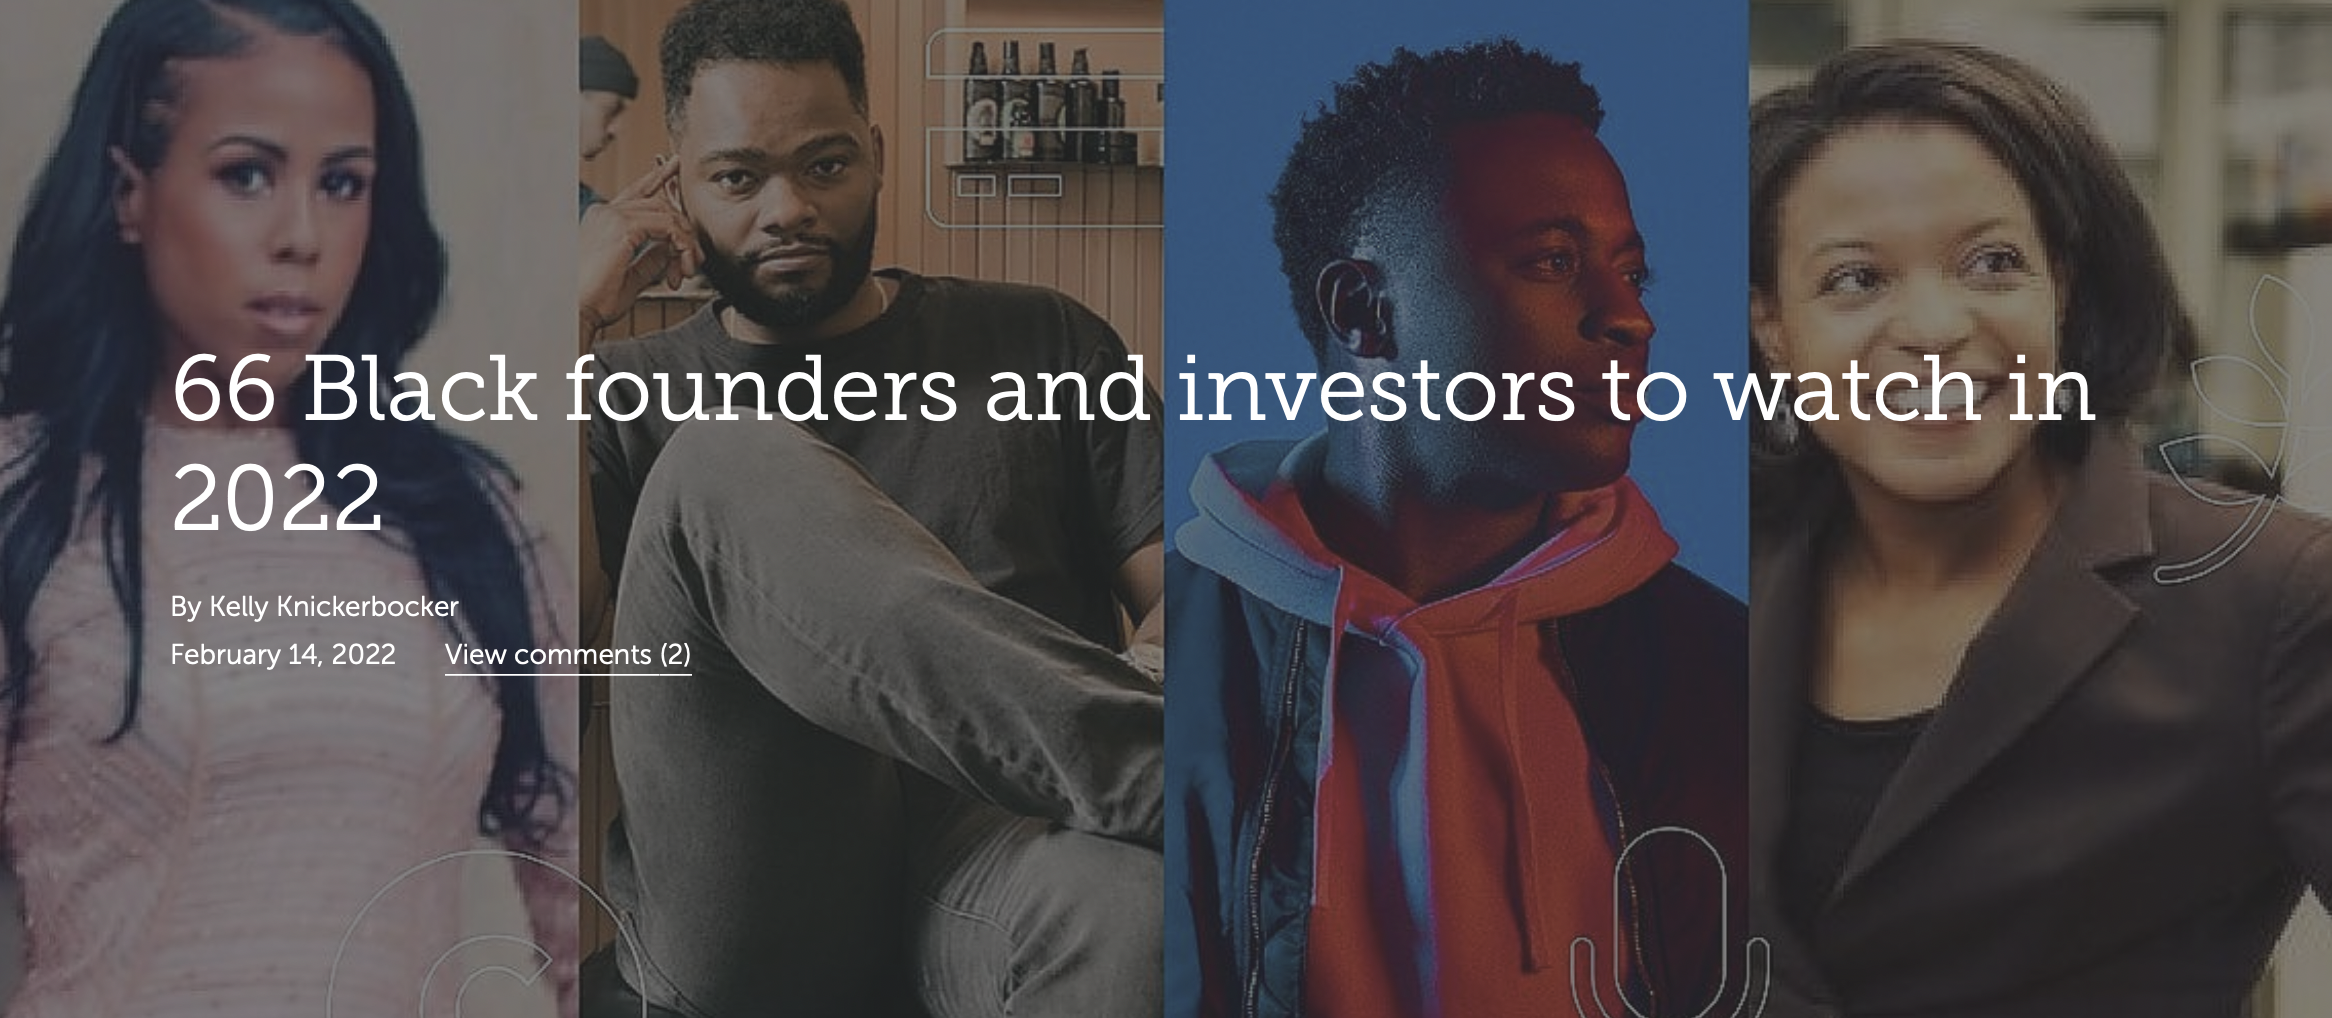 66 Black founders and investors to watch in 2022